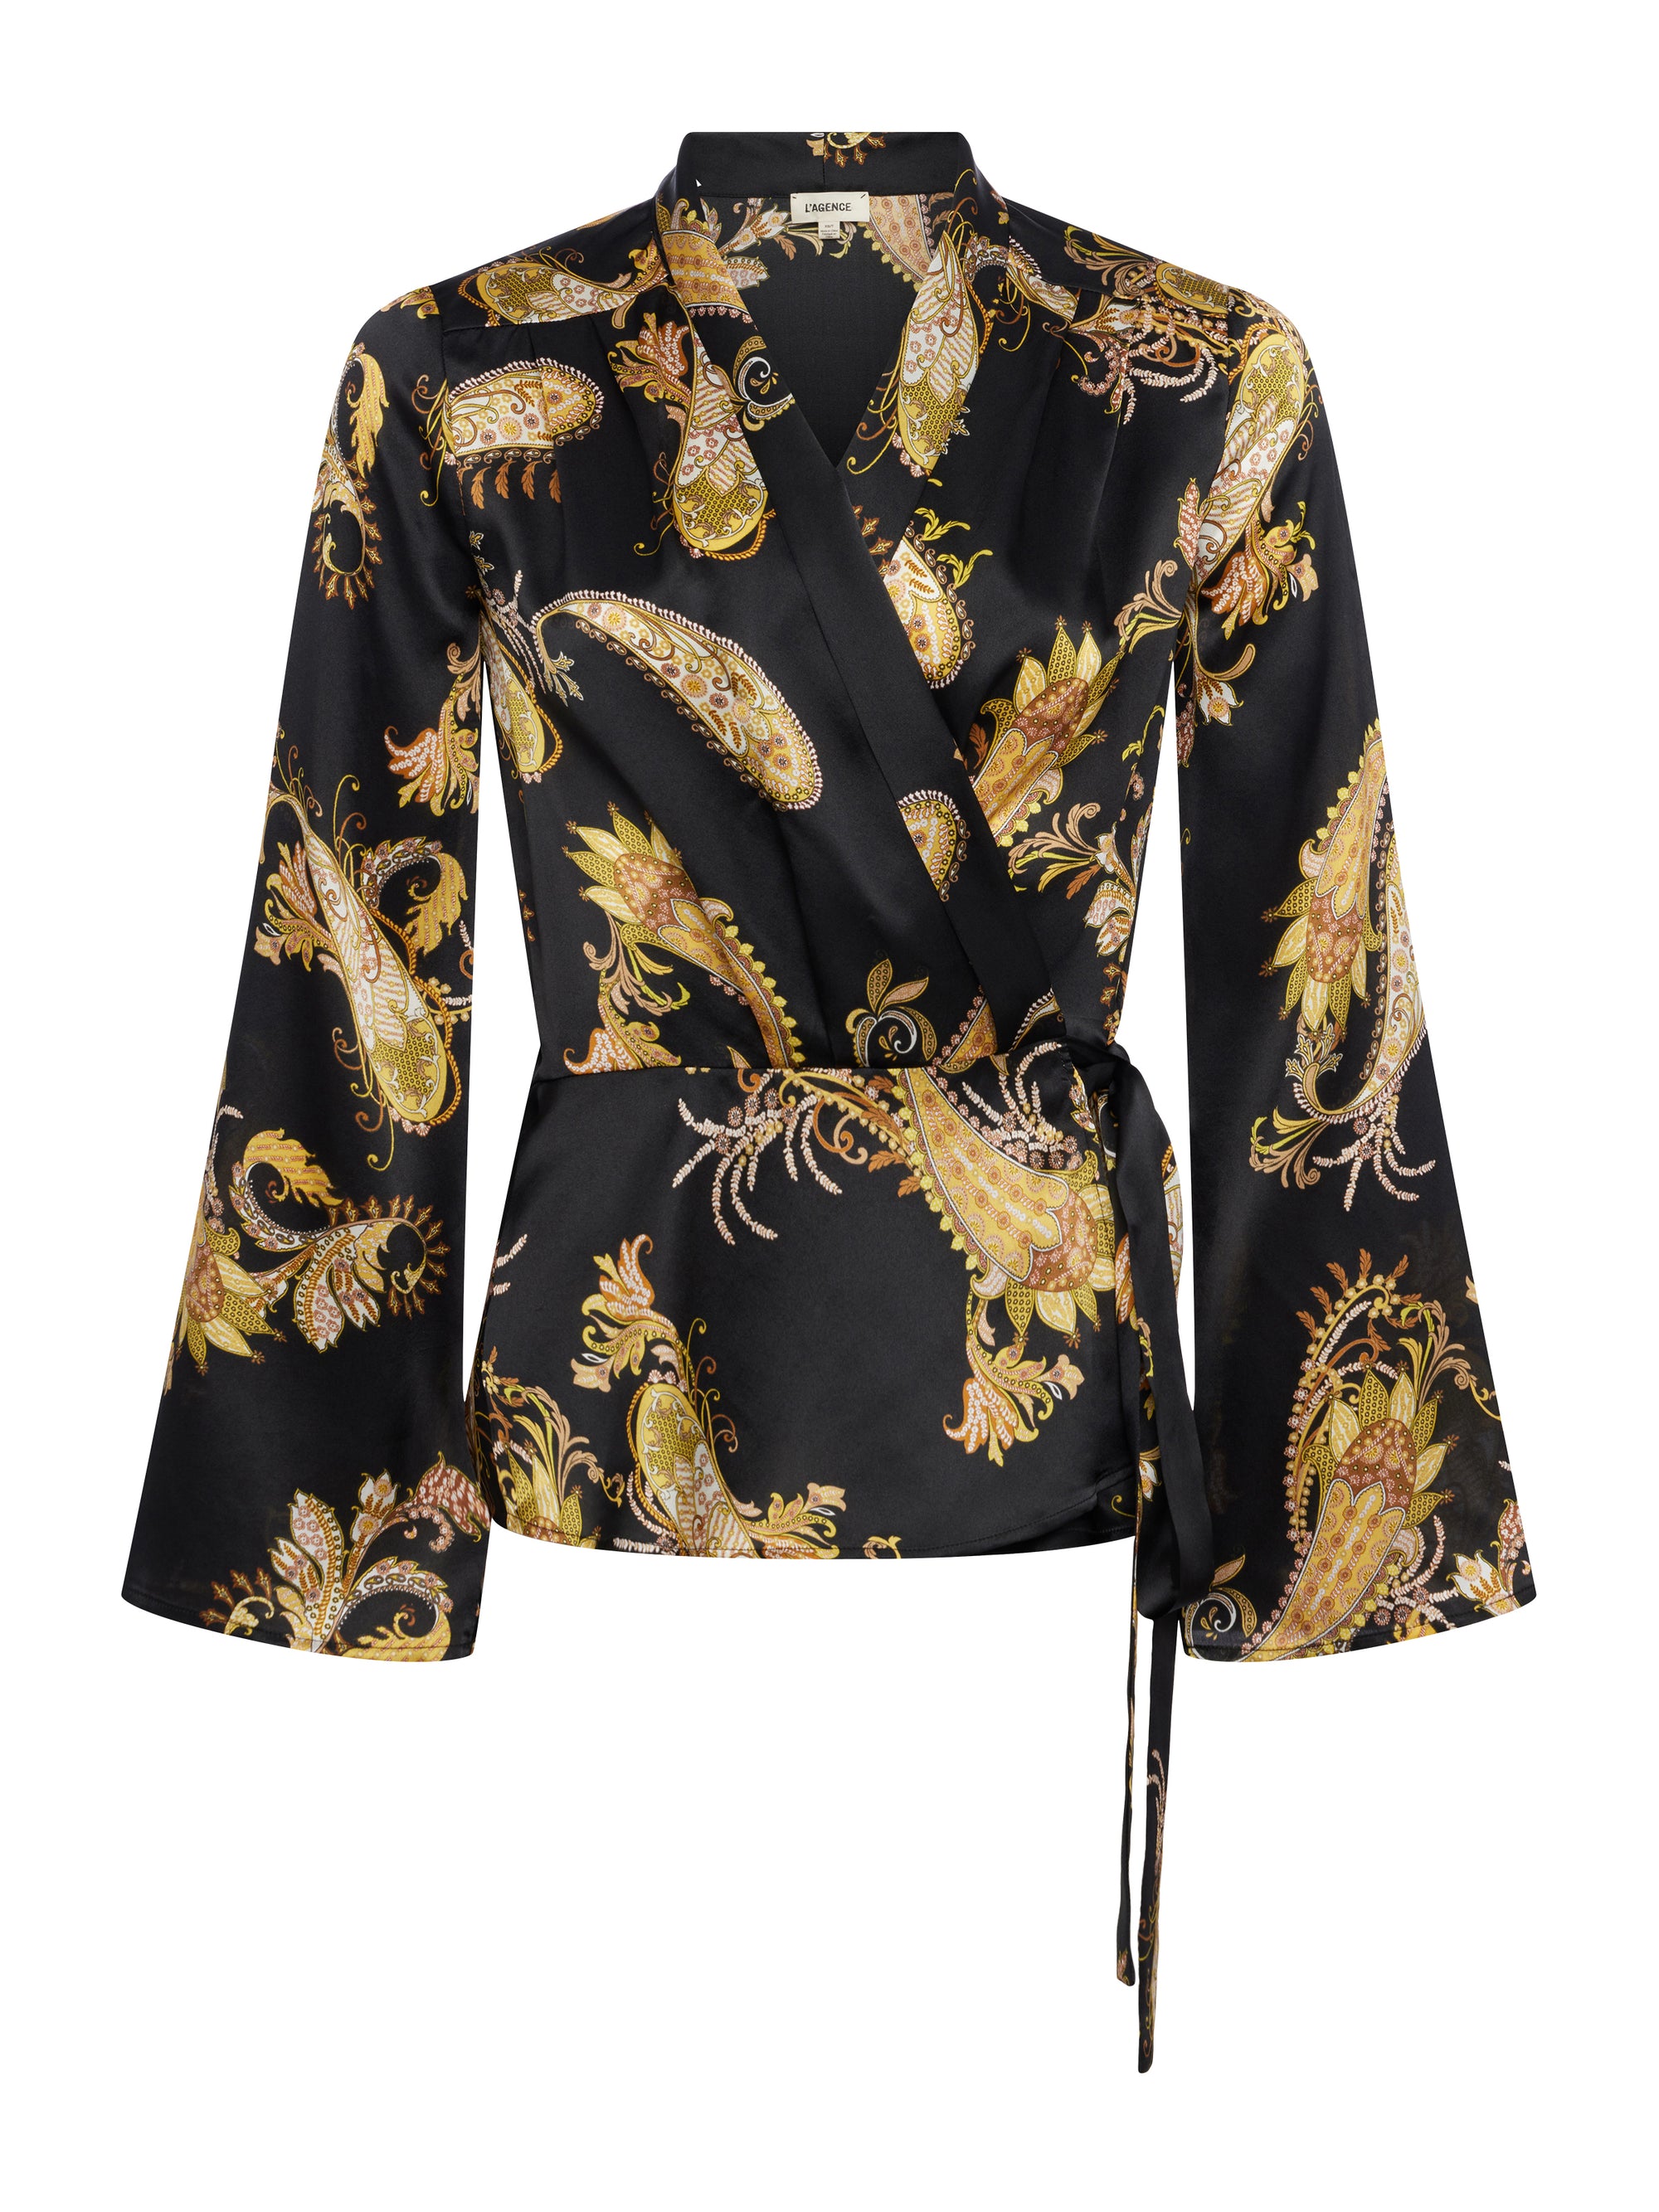 Olive Wrap Blouse by L'agence